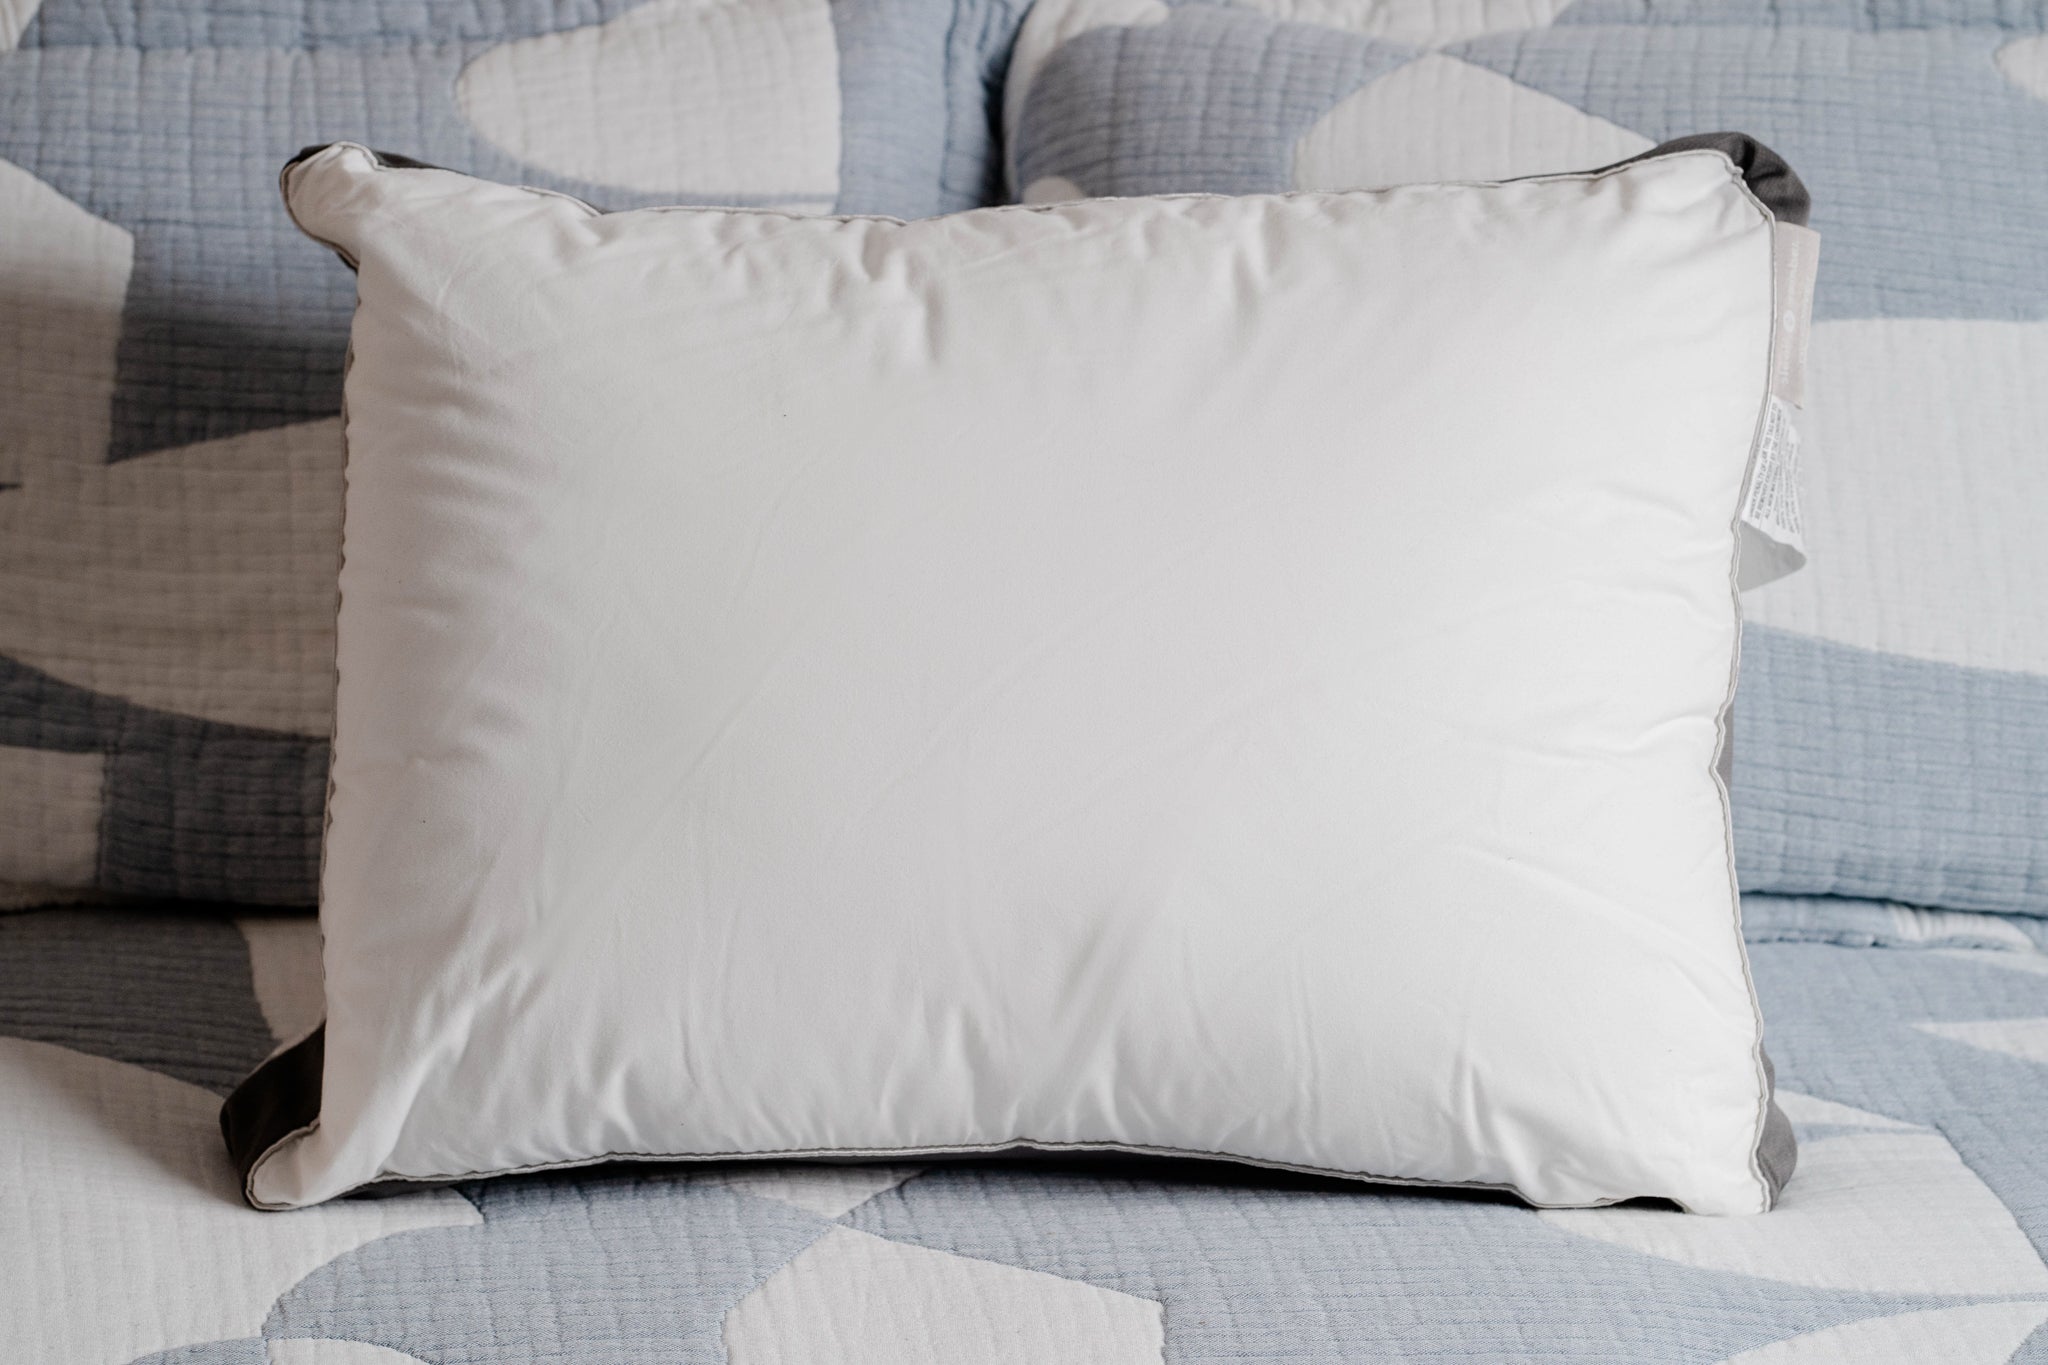 How To Fix Lumpy Pillows